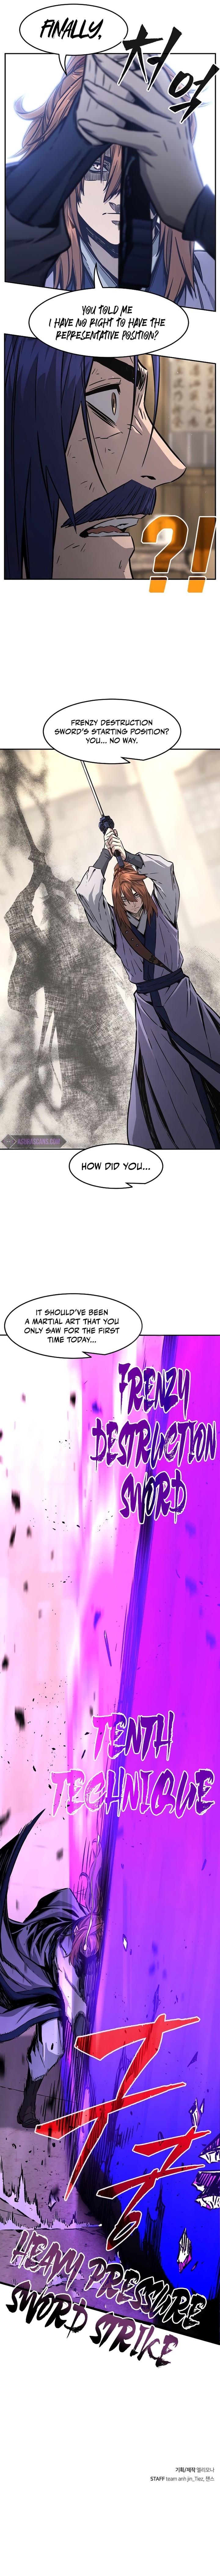 Absolute Sword Sense Chapter 63 Page 13